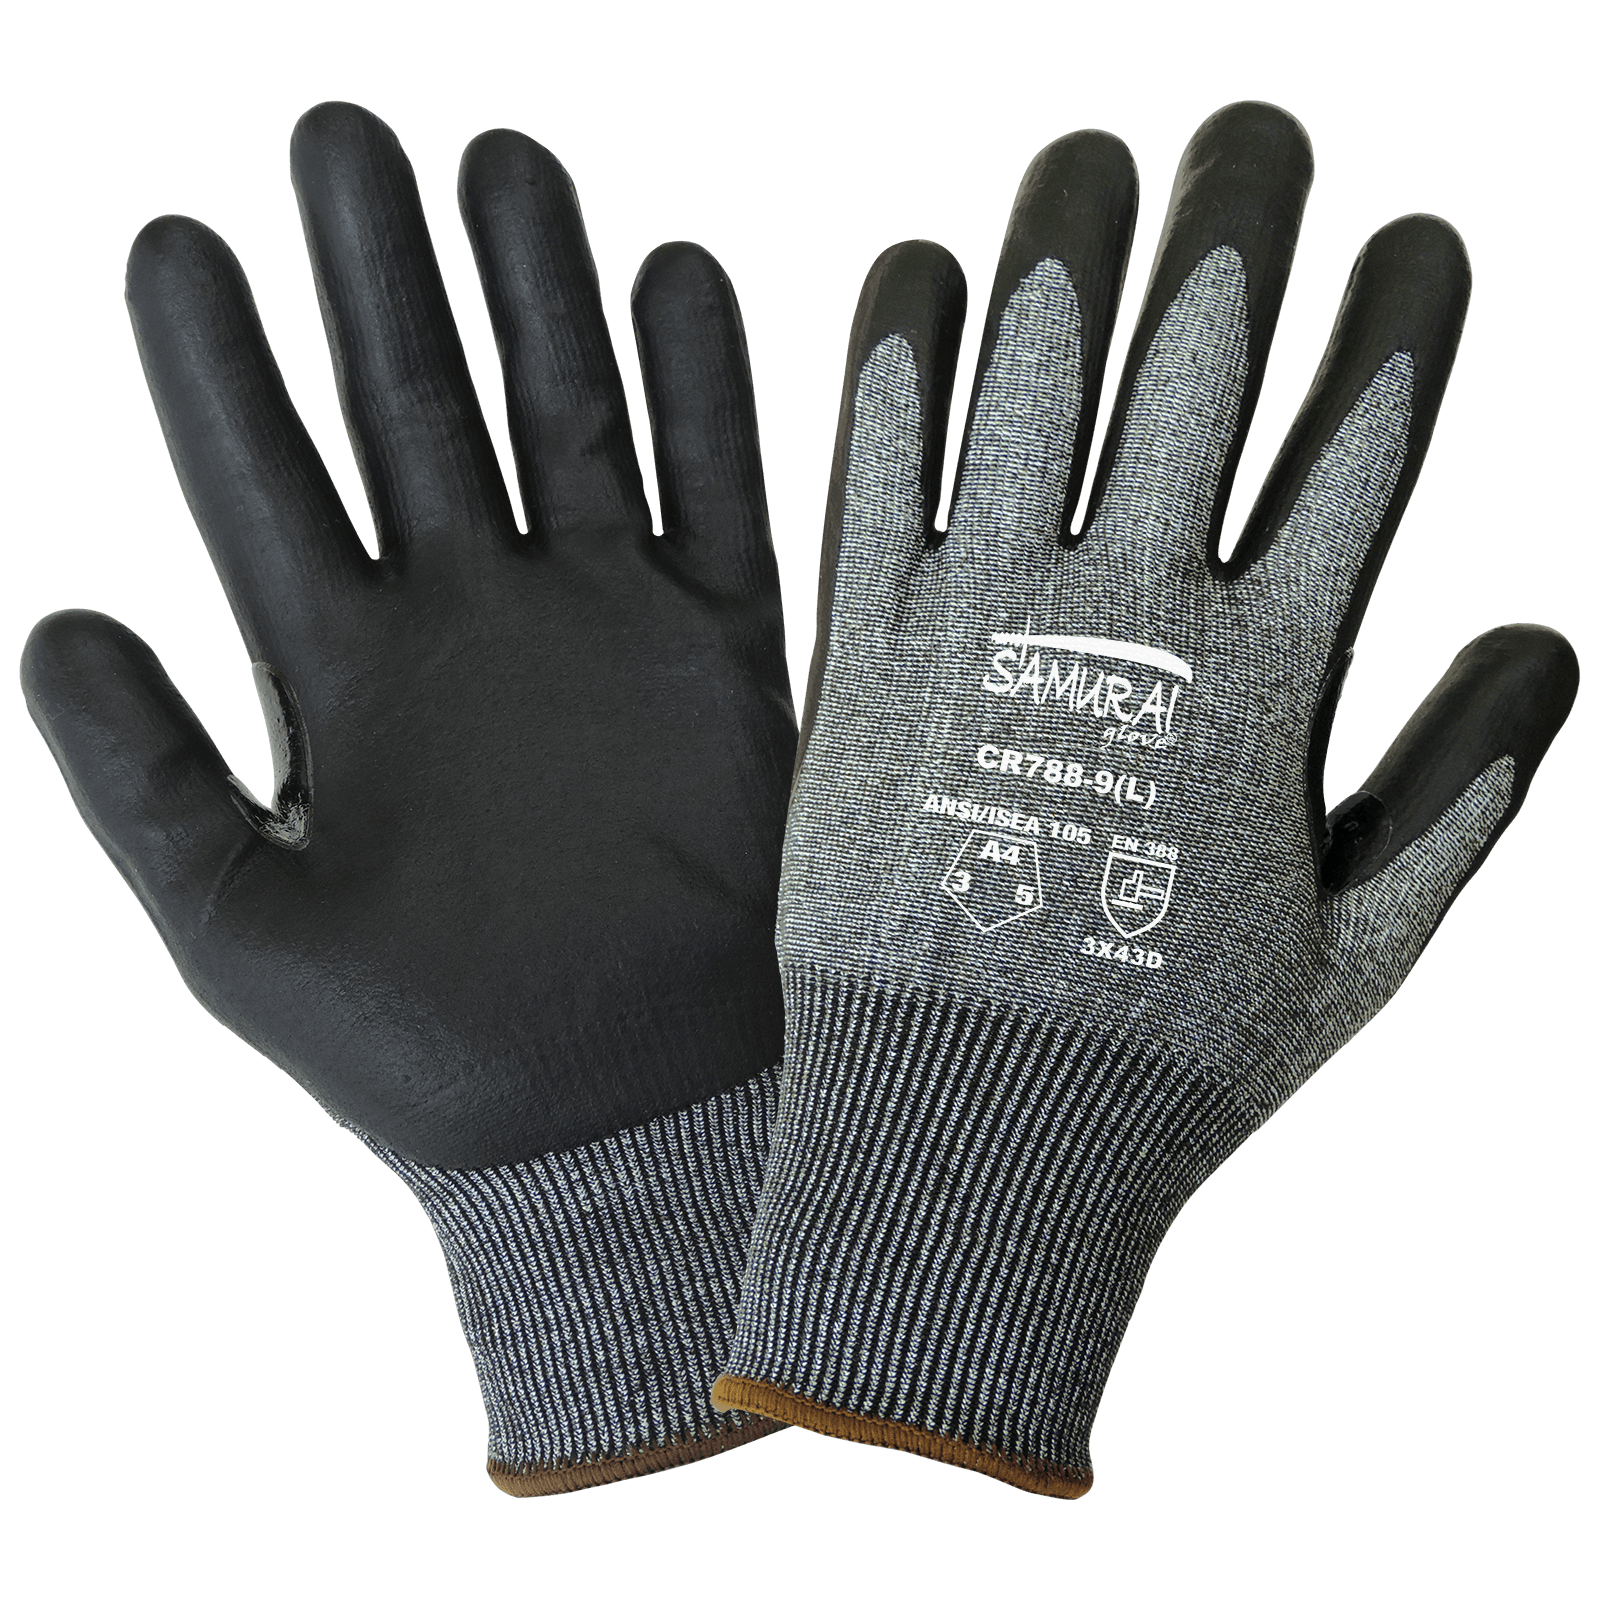 Samurai Glove® Touch Screen Compatible Cut, Abrasion, and Puncture Resistant Glove - Spill Control